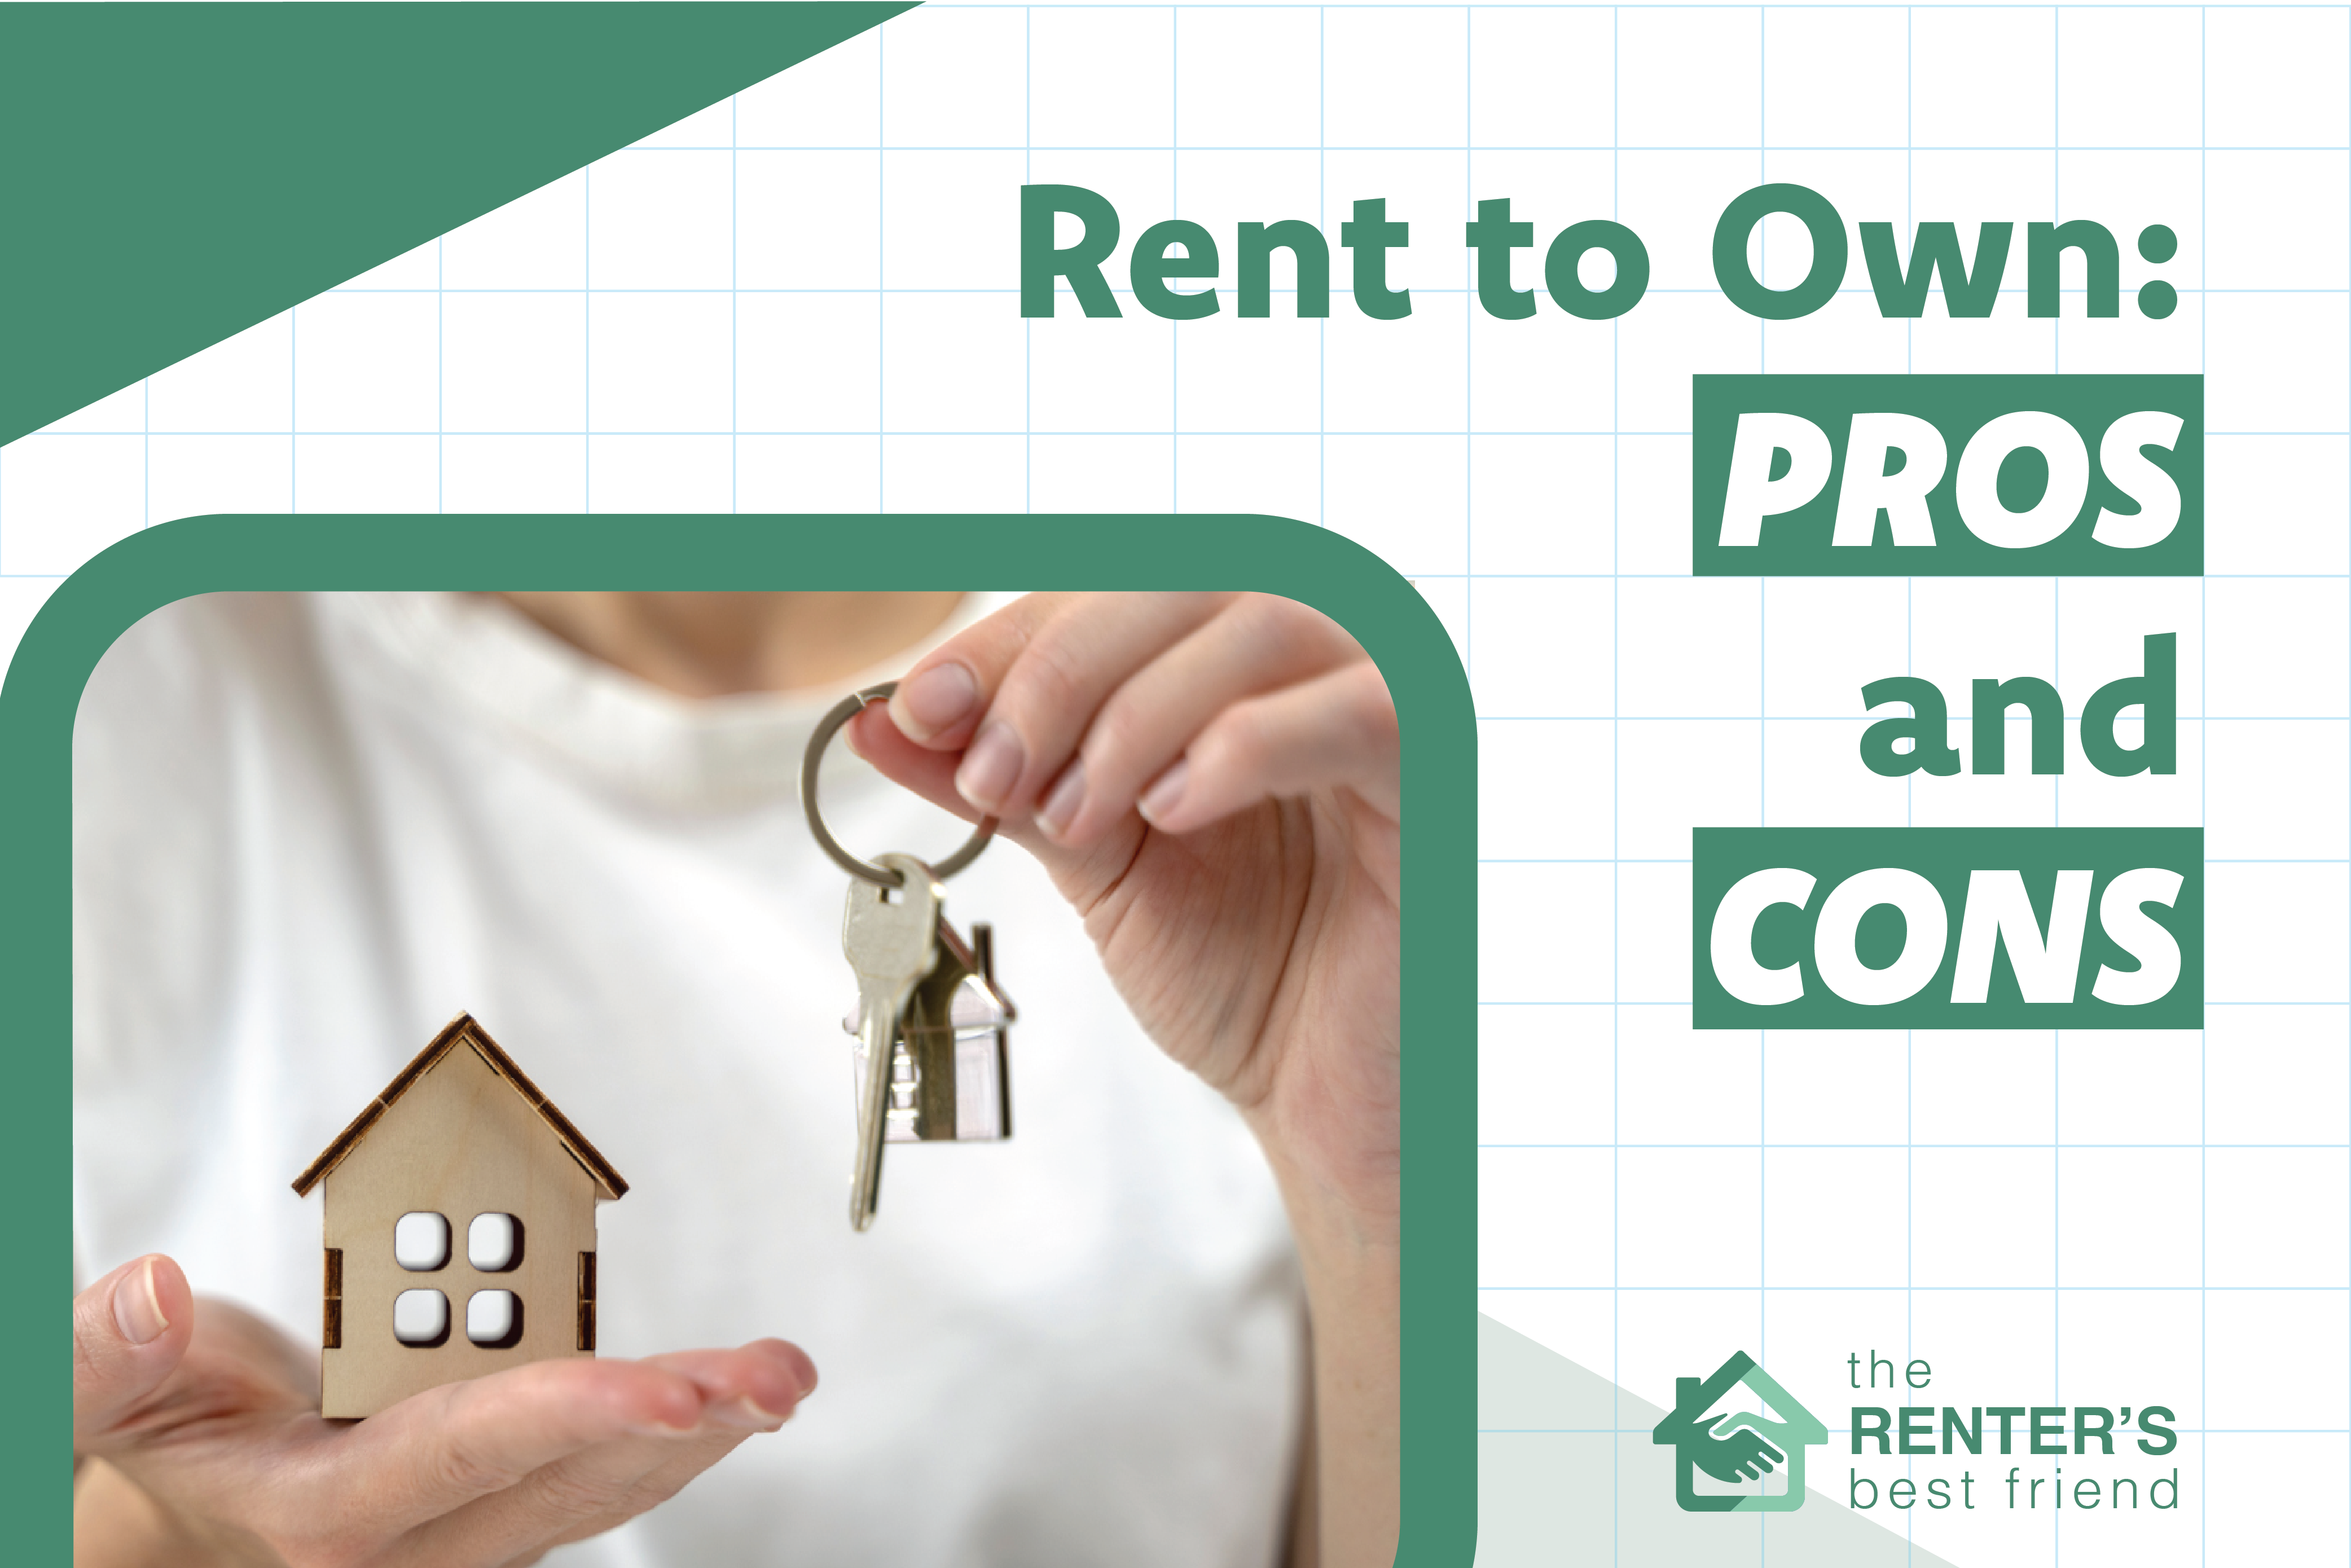 Pros and cons of Rent to Own